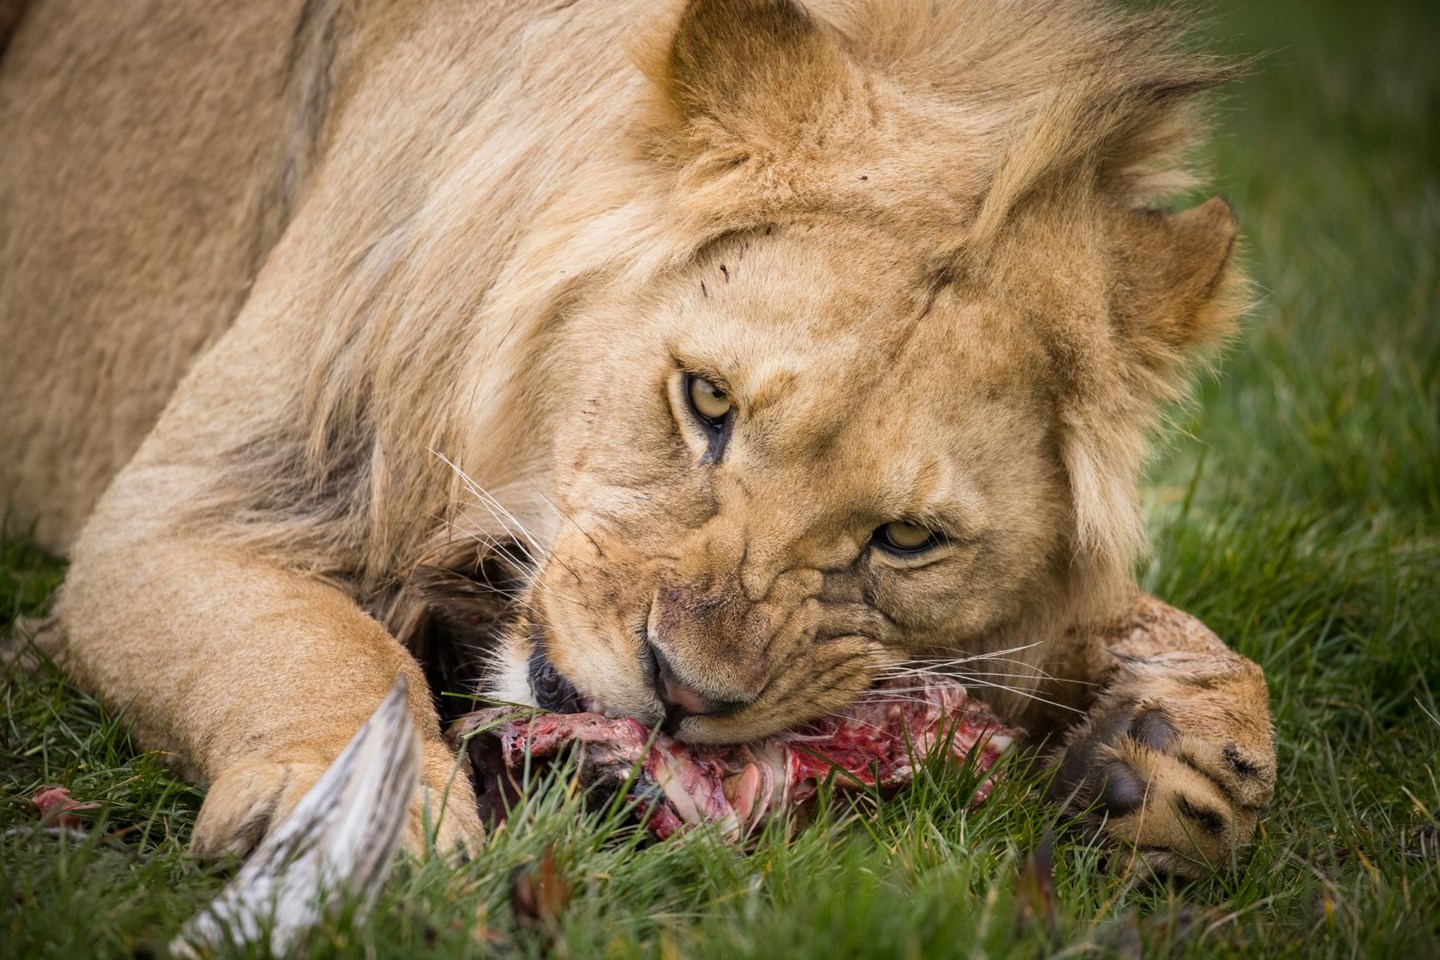 Lion stares at camera as he tucks into red meat while laying on grass